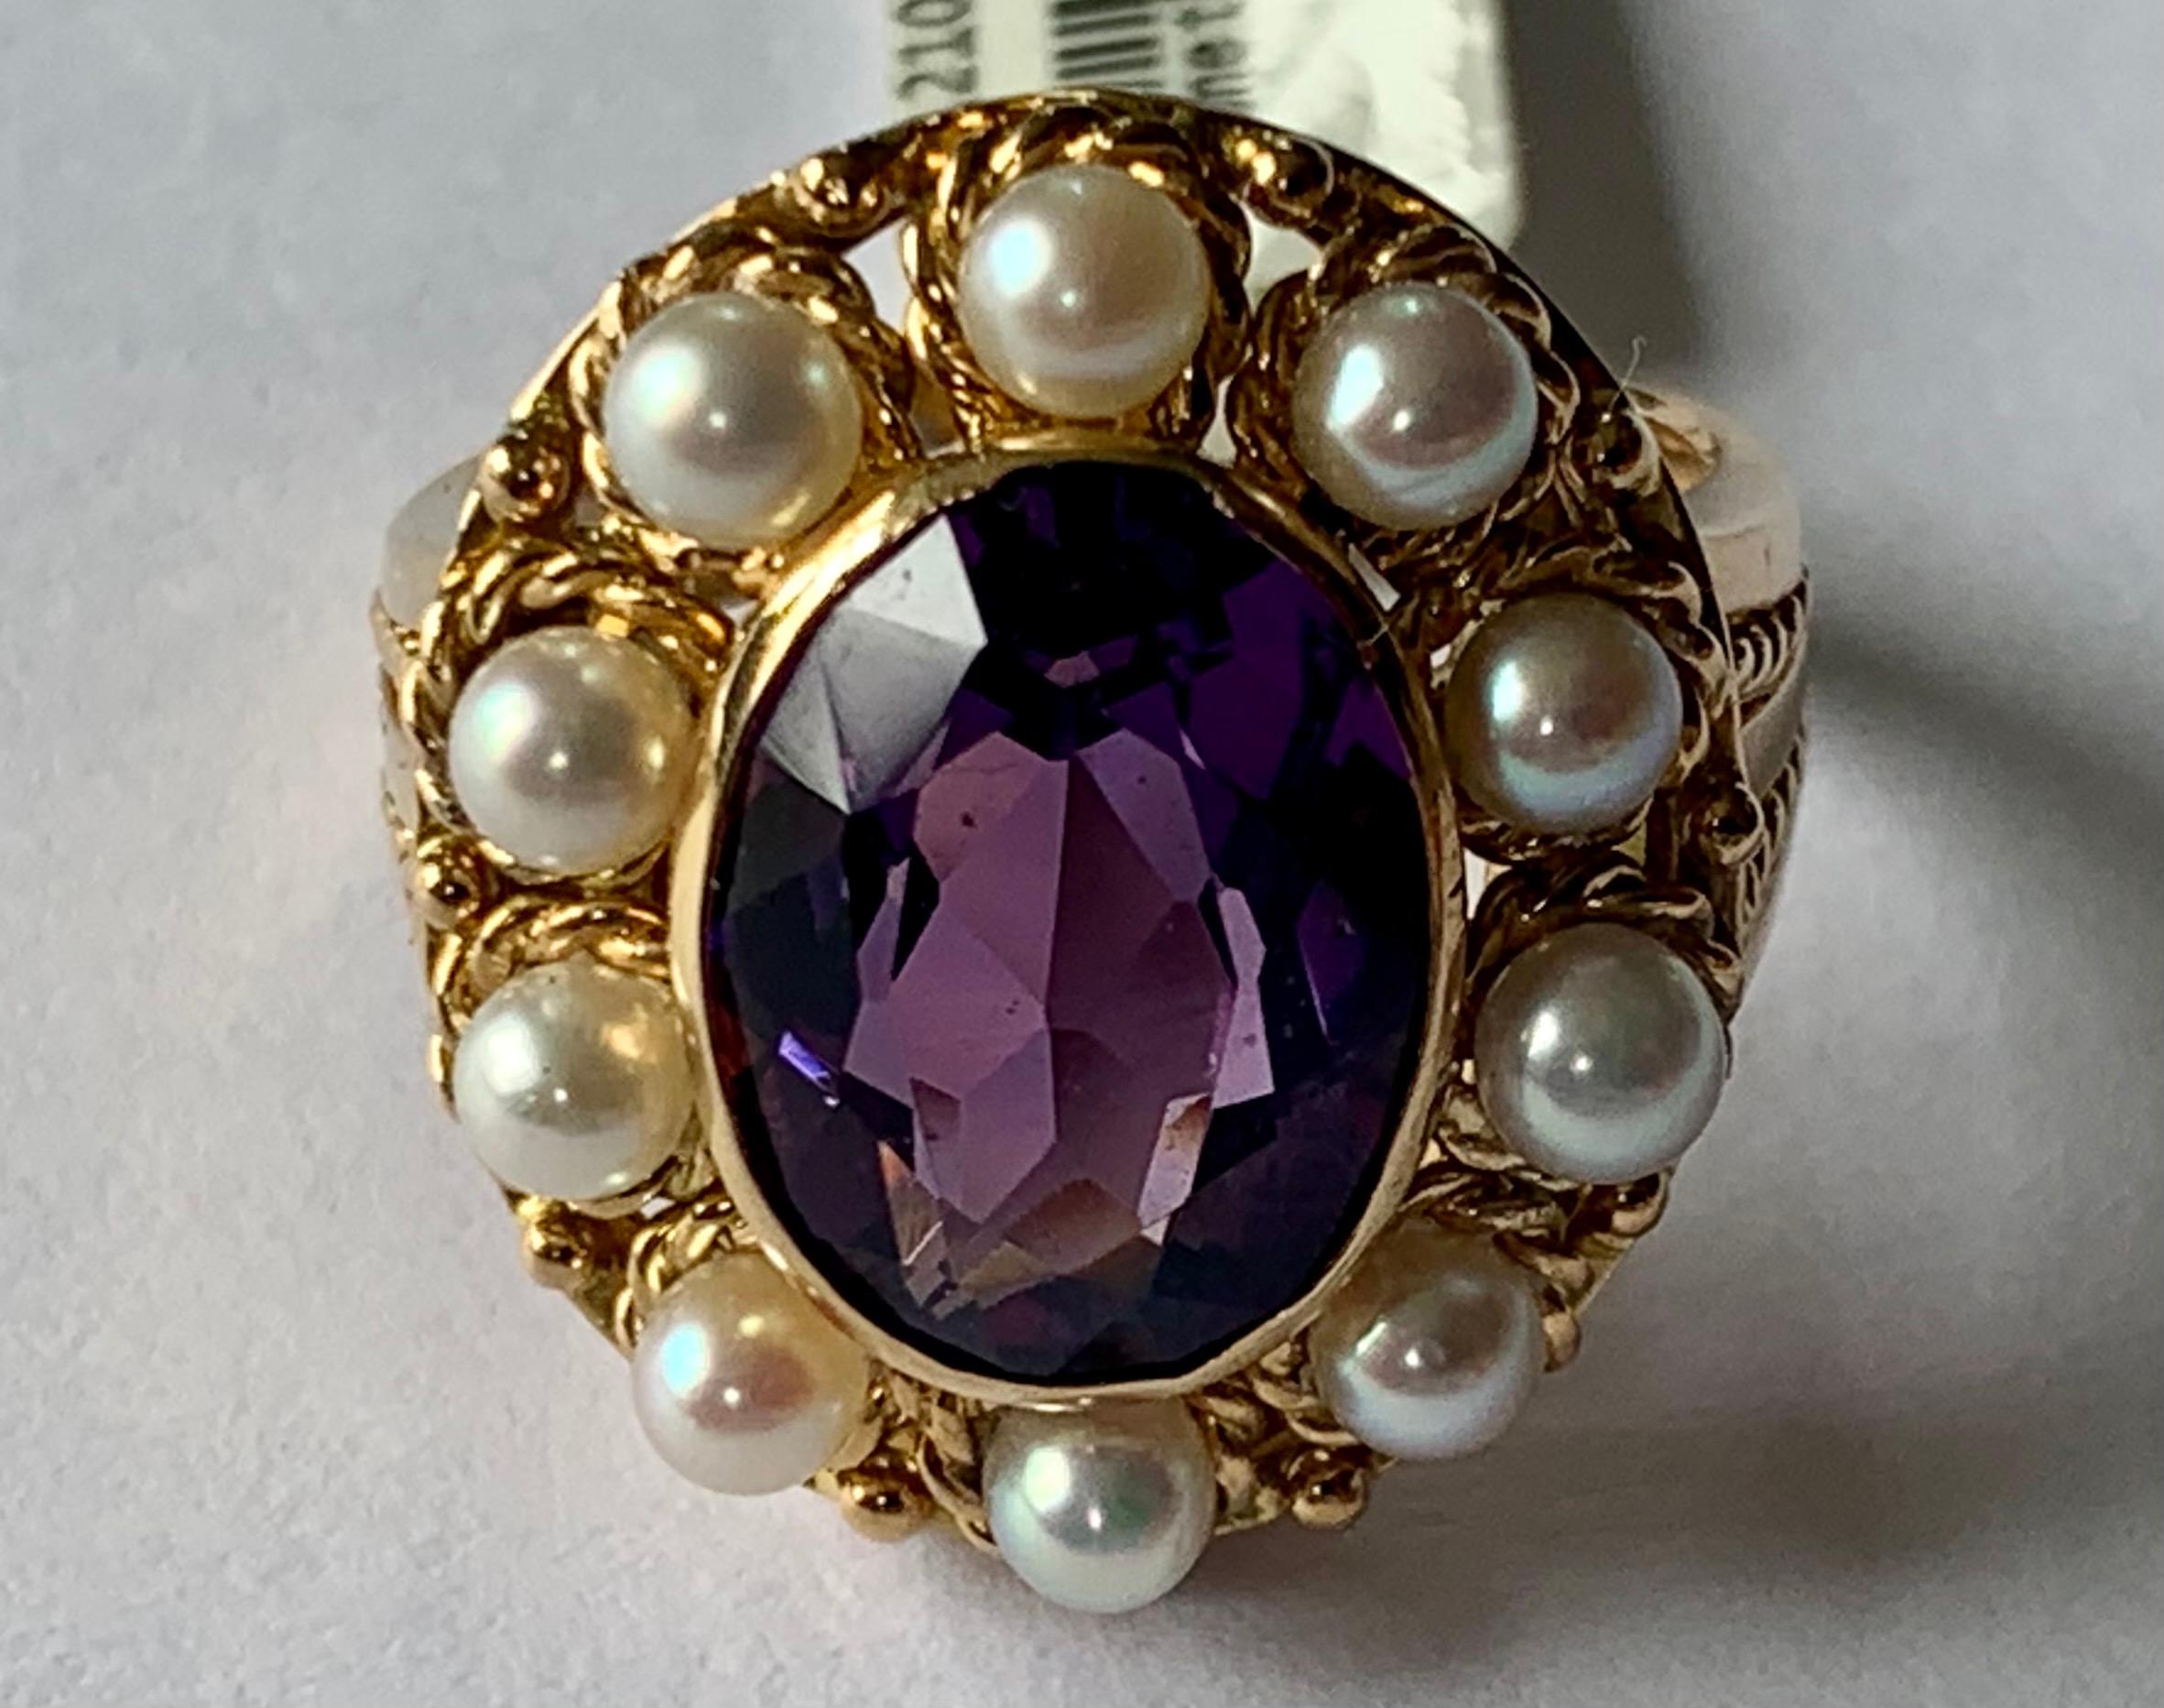 Romantic Vintage Ring in 18 K yellow Gold inspired by the Victorian era featuring an oval cut Amethyst and cultured pearls in a rope textured setting. 
The ring is currently size 13/53 but can be resized easily. 
Matching pendant/brooch